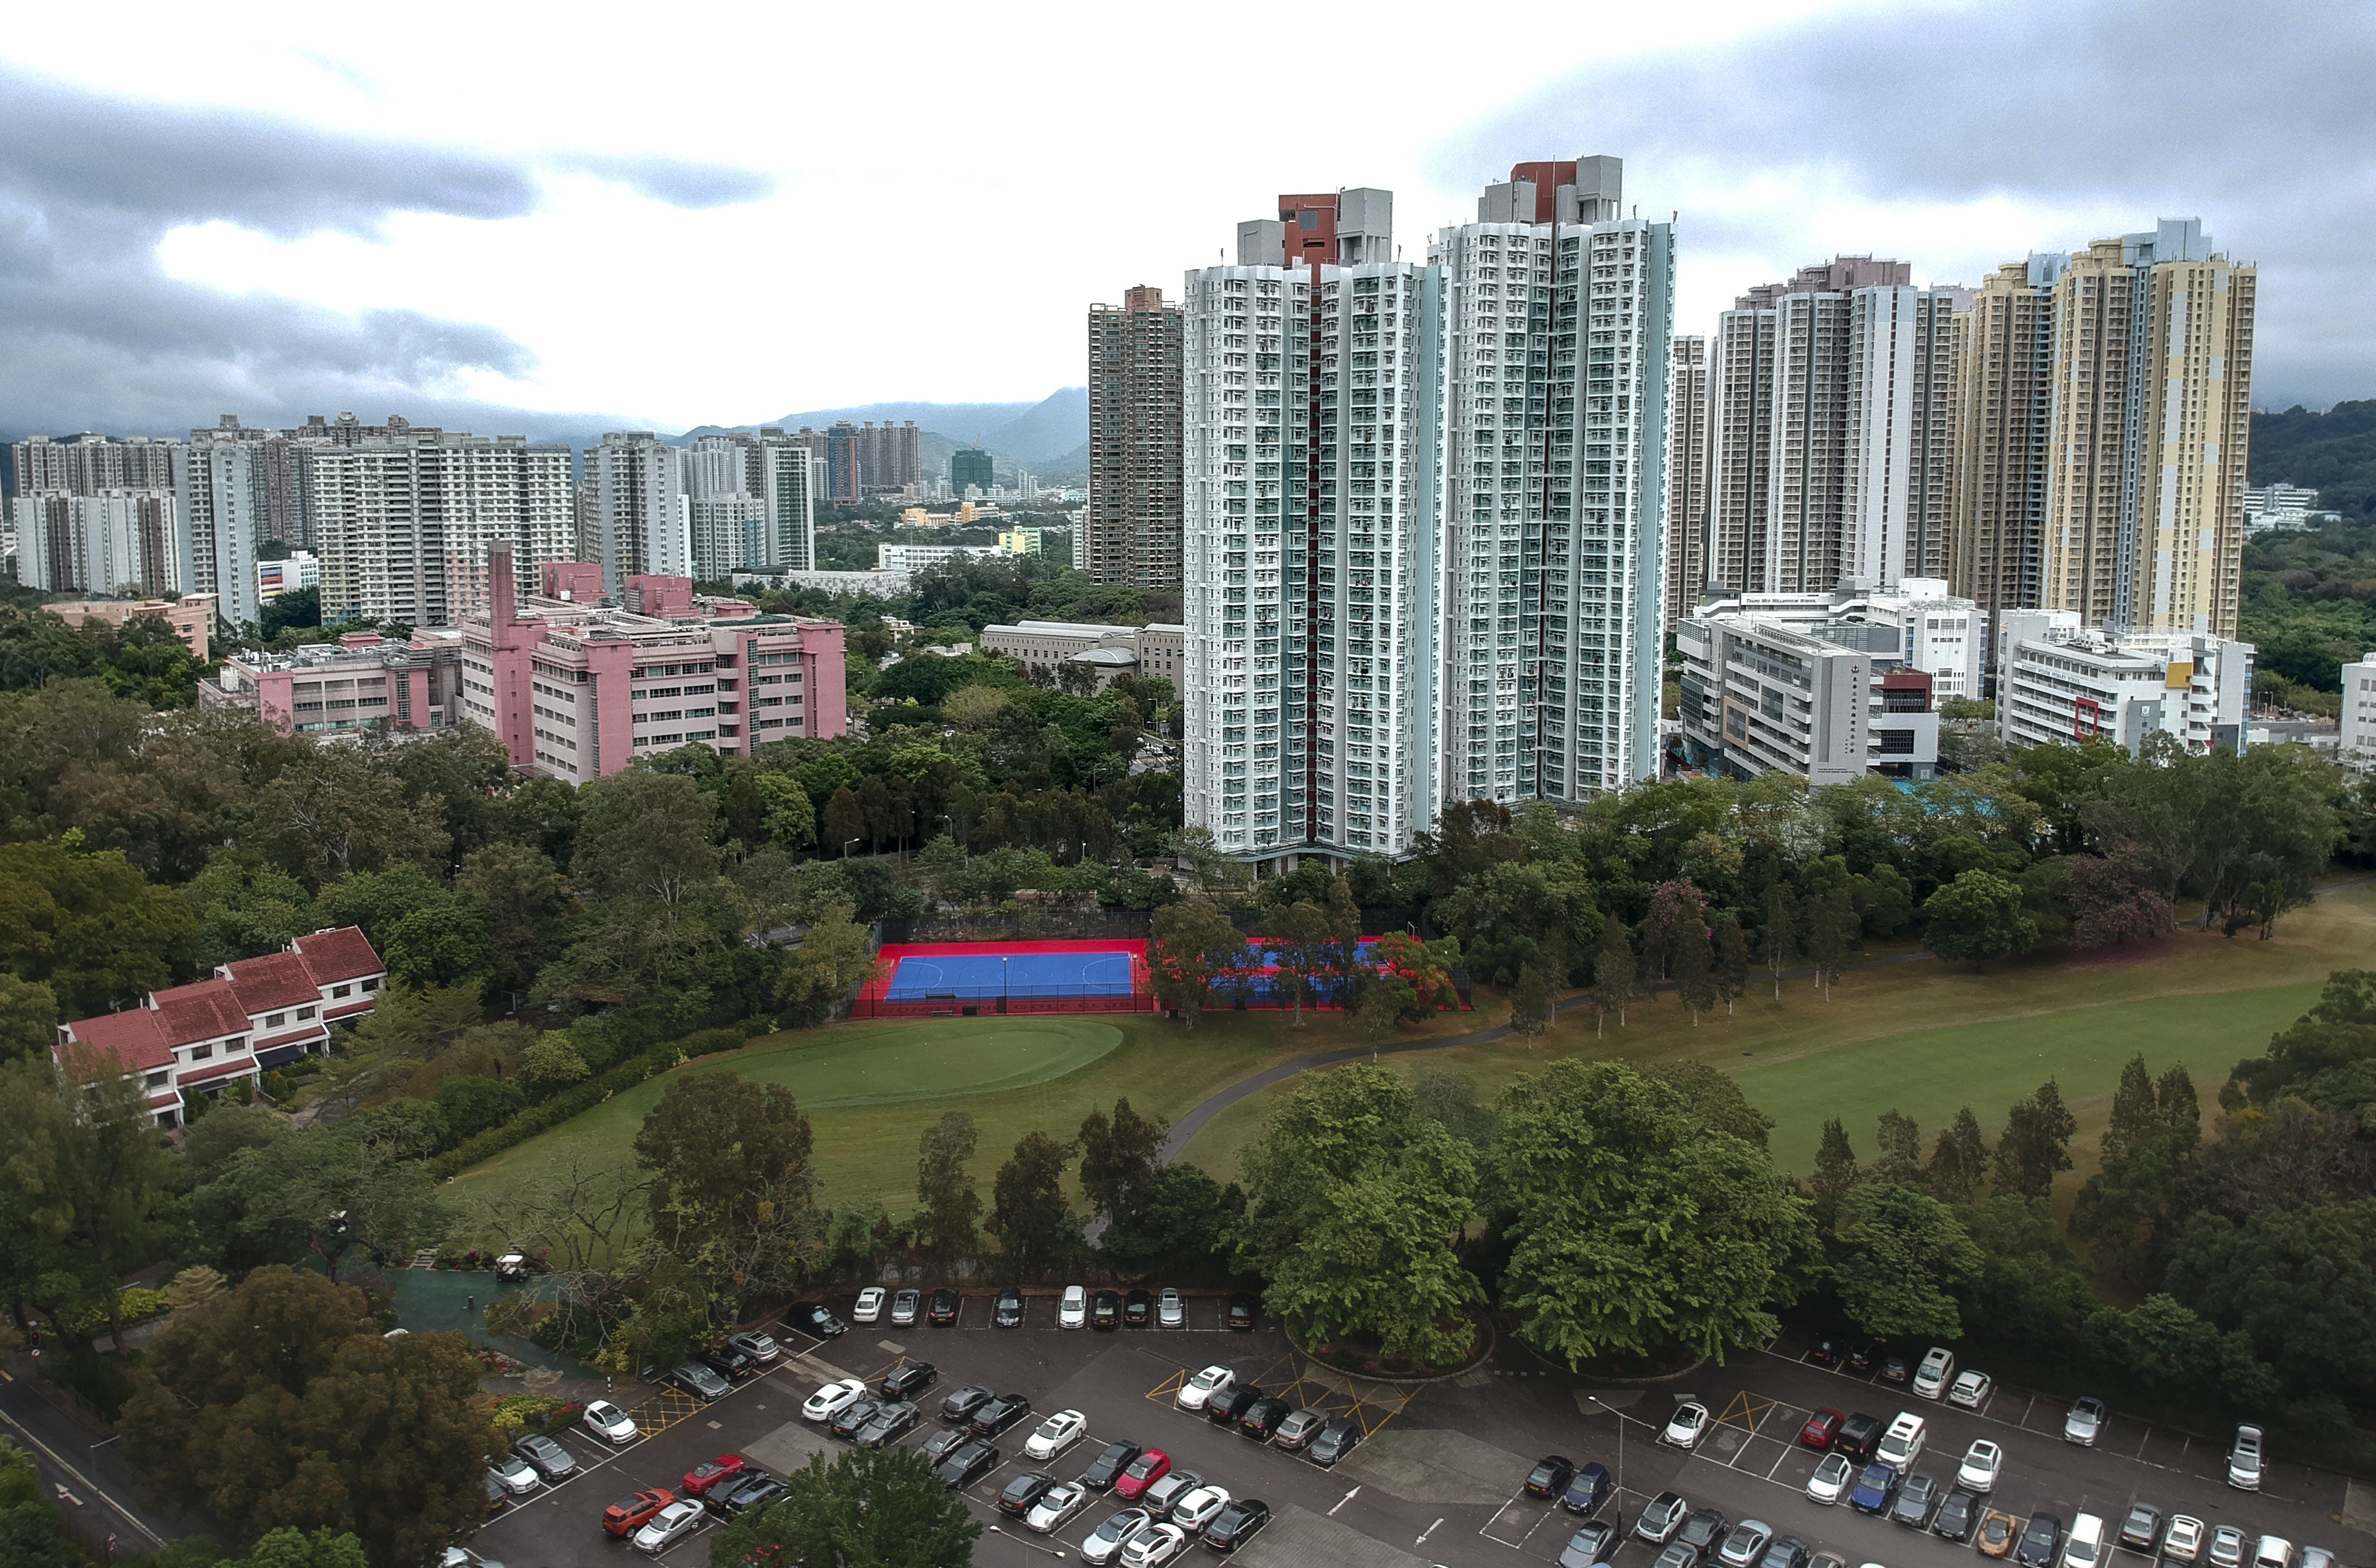 The debate over whether the Fanling golf course should be used to build flats to solve Hong Kong’s housing crisis has developed into a discussion on income inequality in the city. Photo: Roy Issa